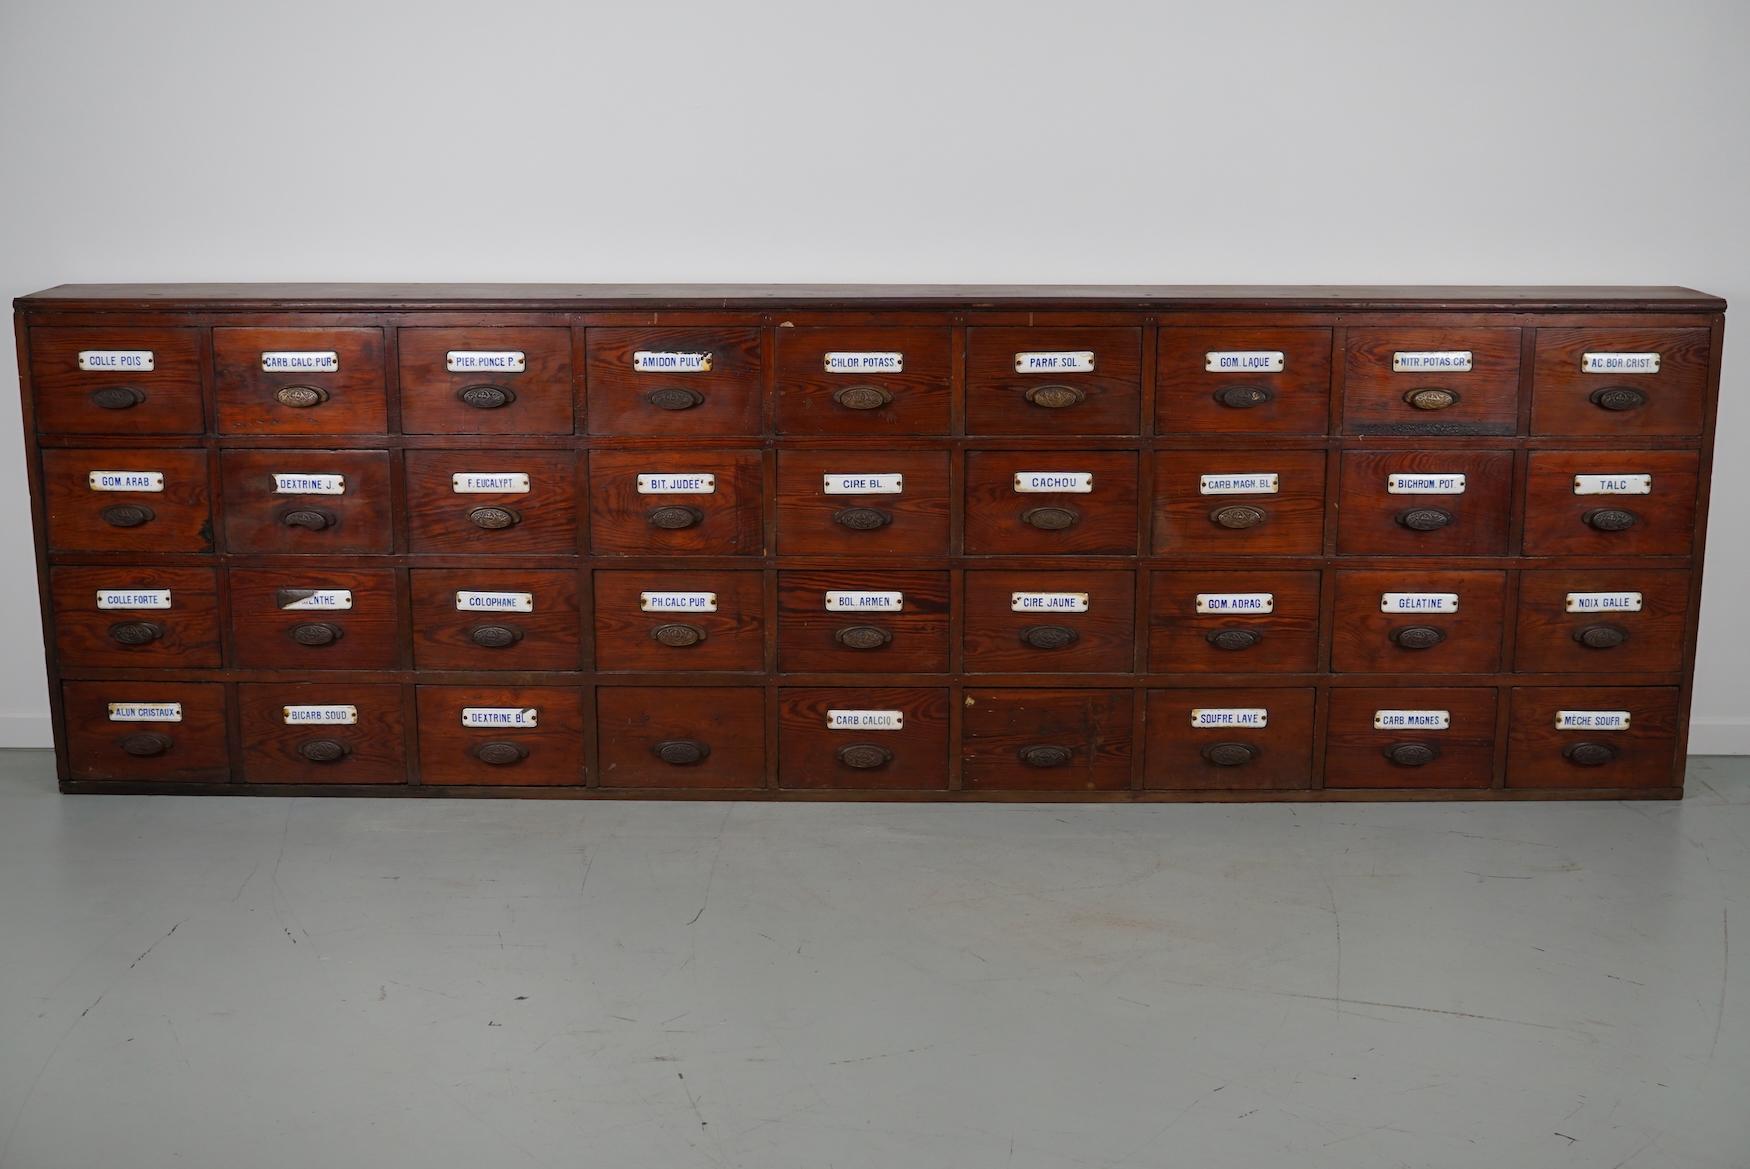  Large Antique Belgian Pitch Pine Apothecary Cabinet with Enamel Shields, 1900s For Sale 5